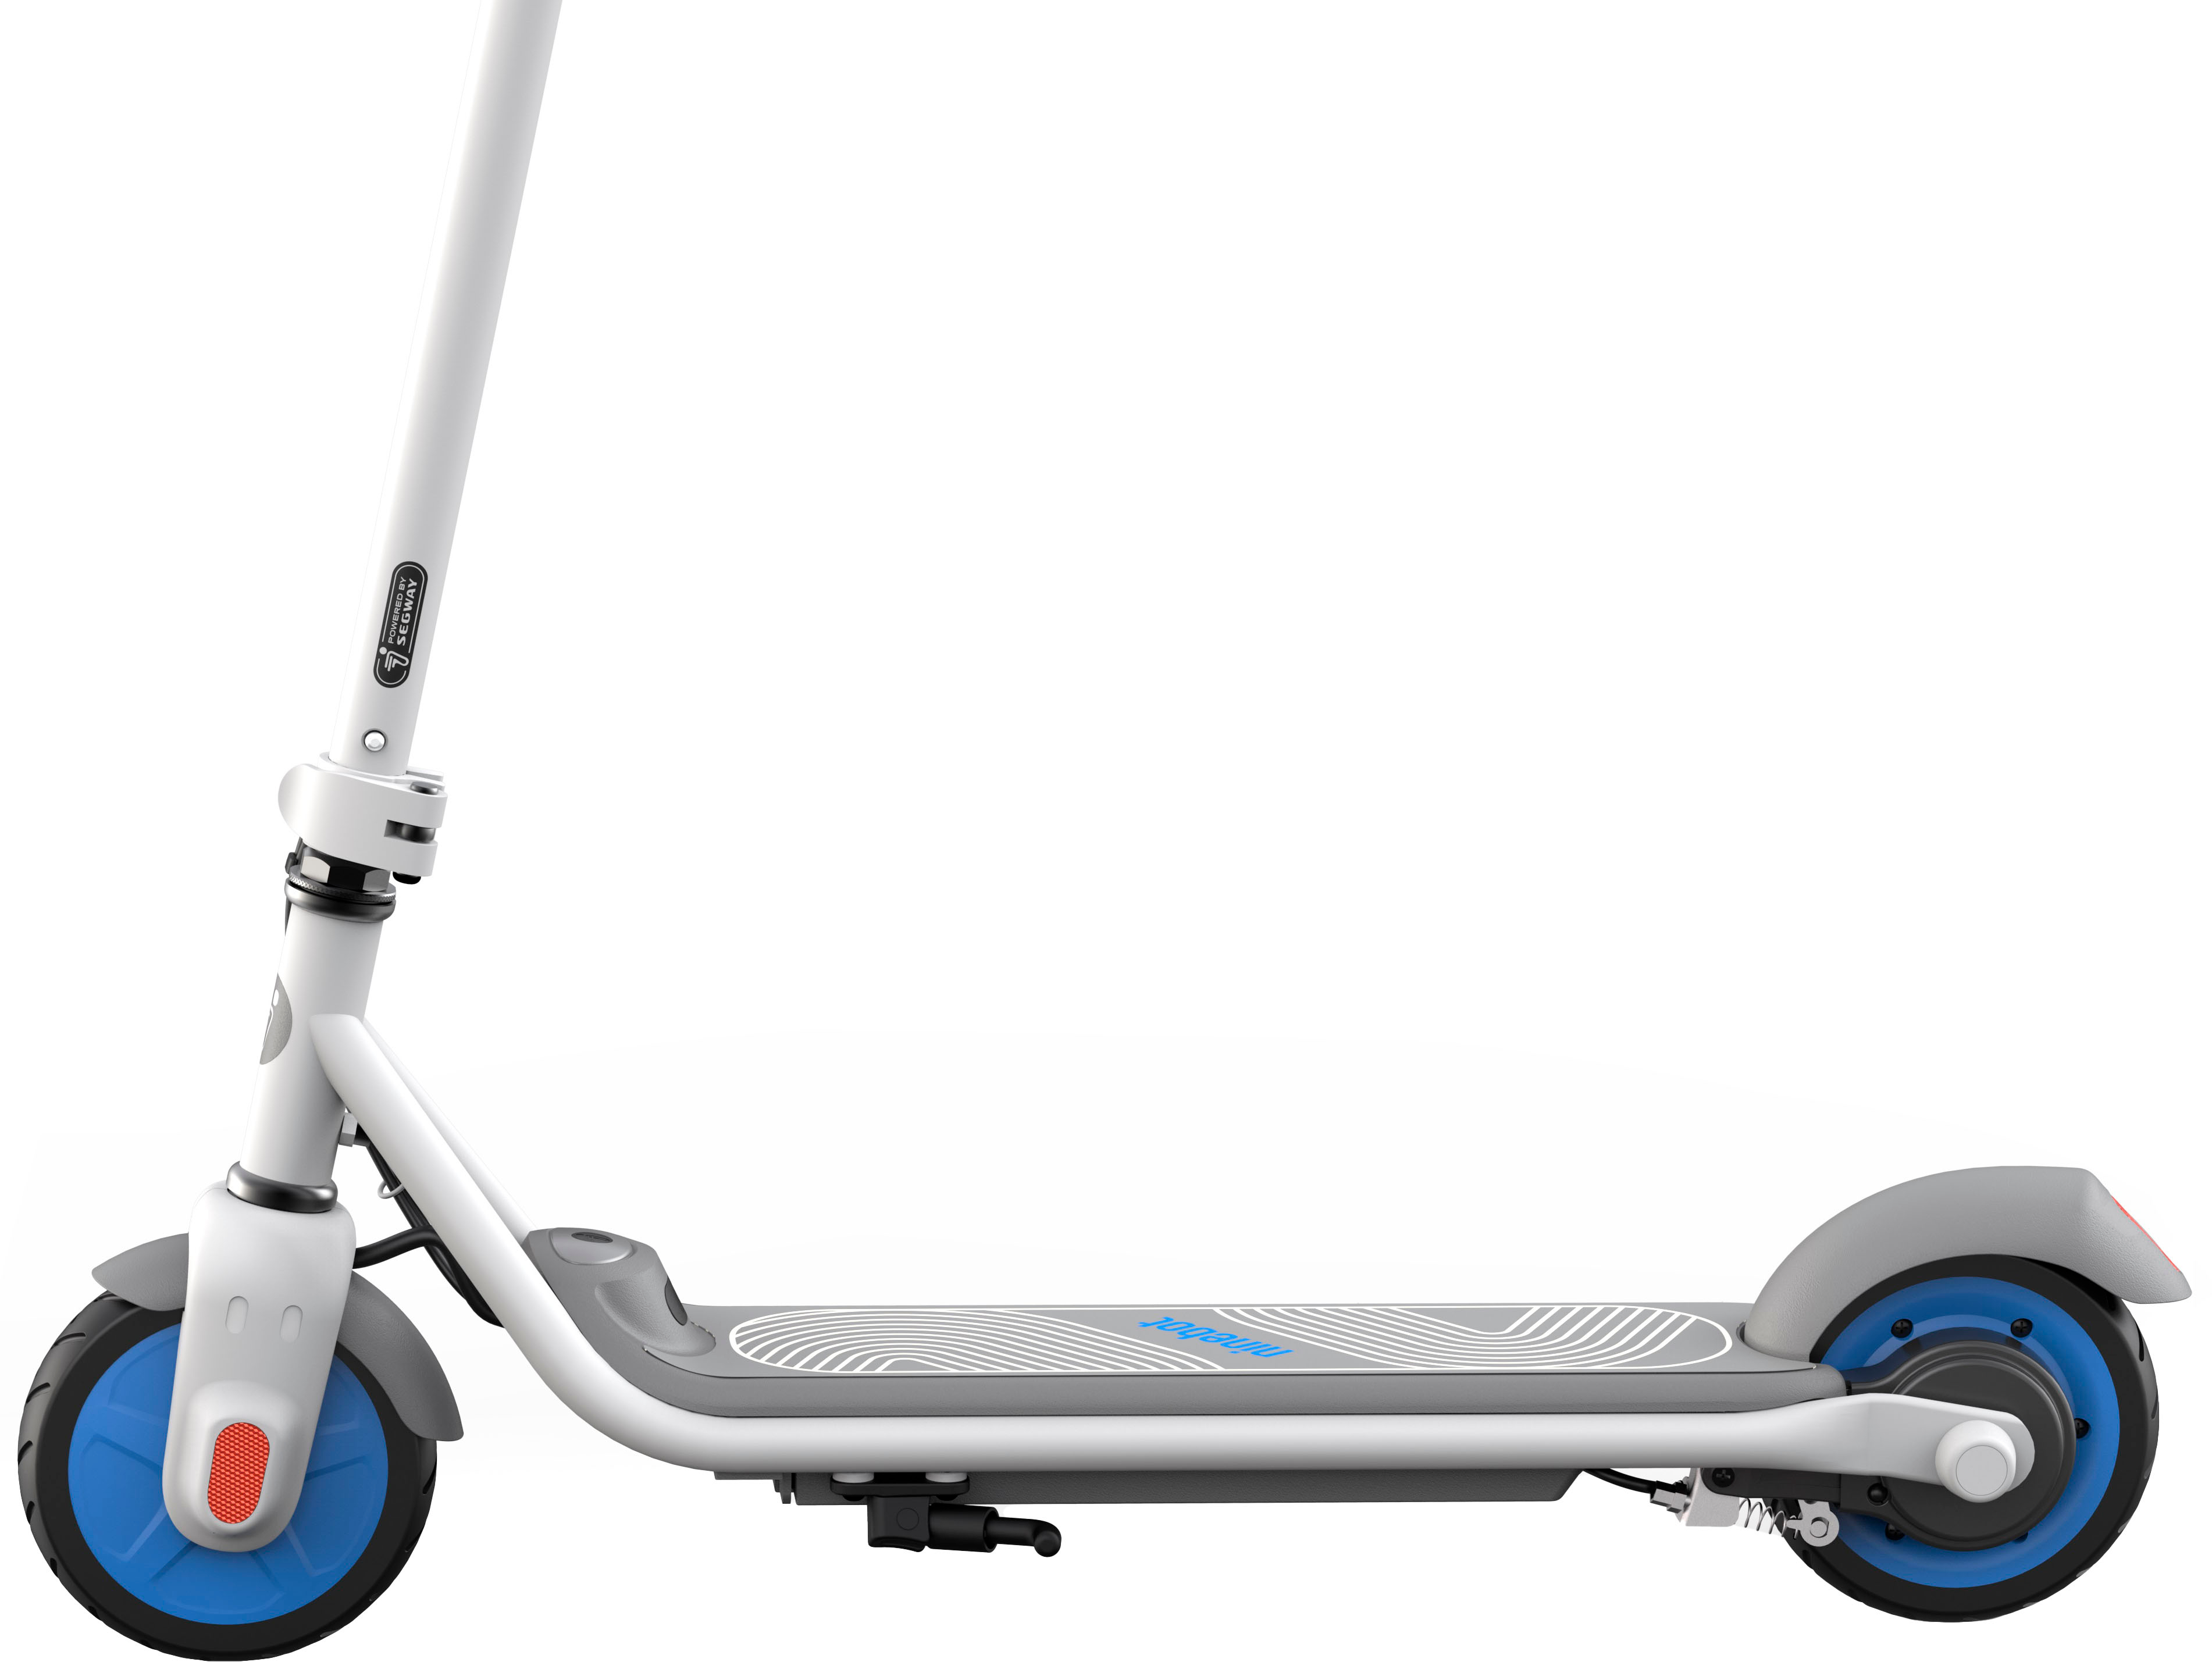 Angle View: Segway - Ninebot C9 Kids Electric Scooter w/6.2 mi Max Operating Range & 11.2 mph Max Speed - Blue